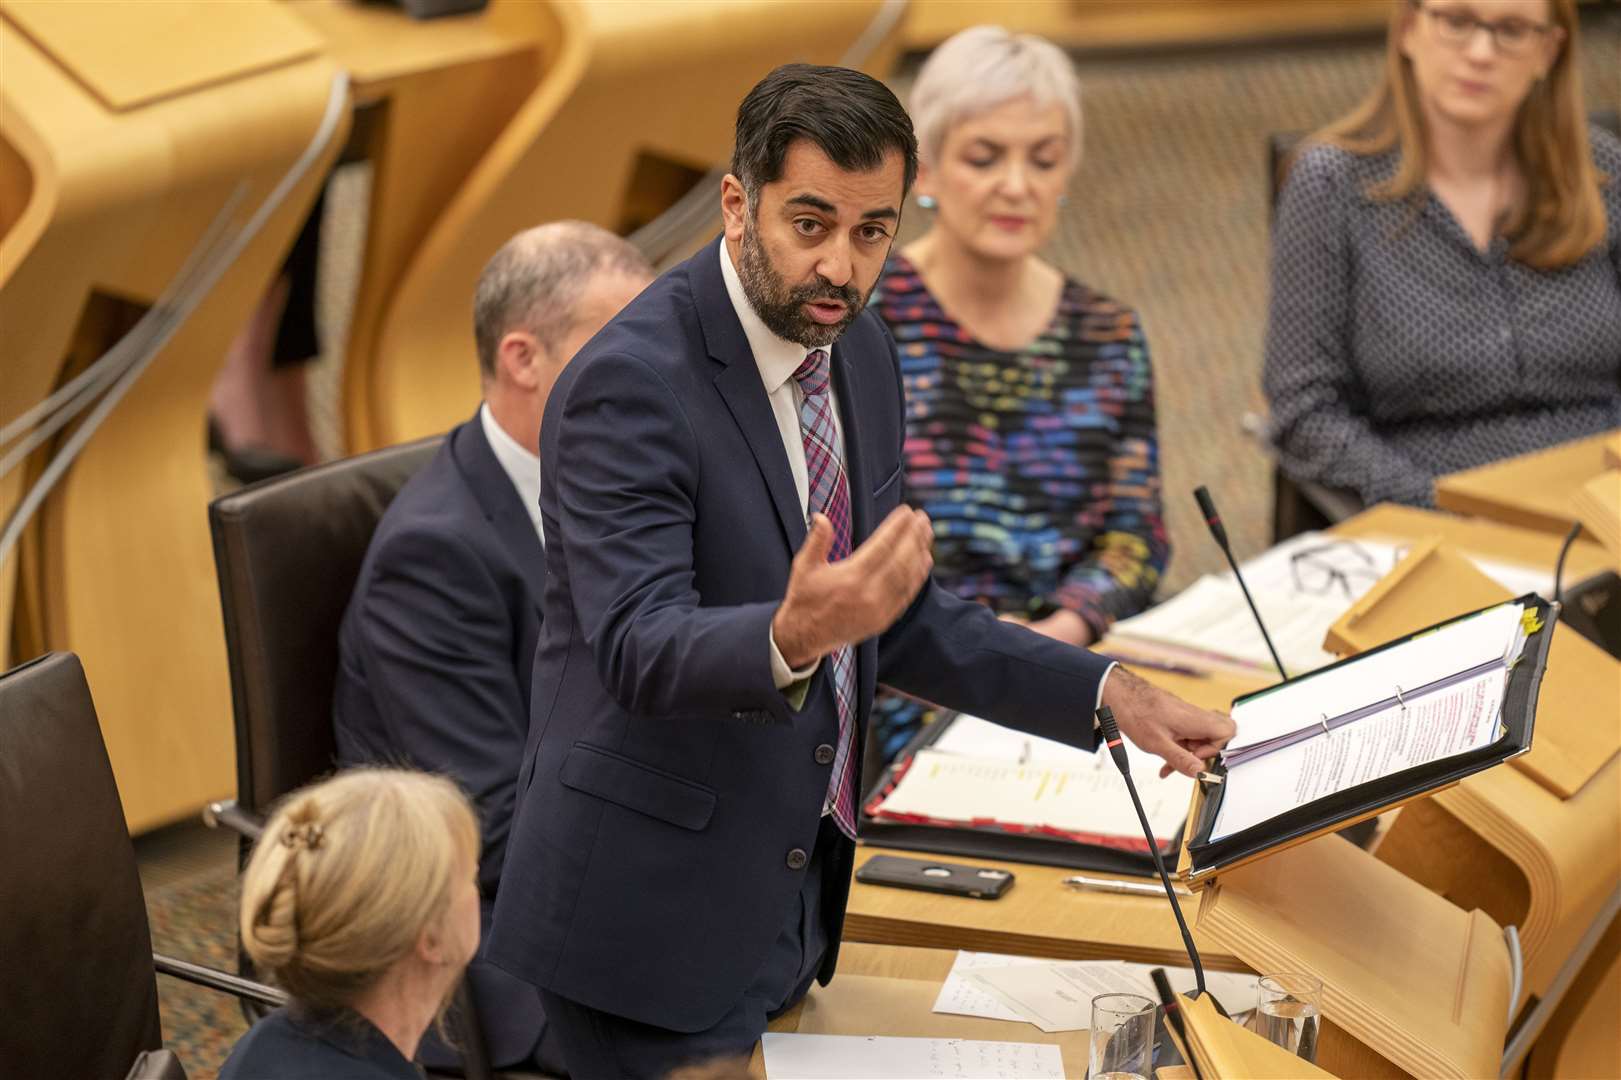 Humza Yousaf was challenged over the WhatsApp messages during FMQs on Thursday (Jane Barlow/PA)